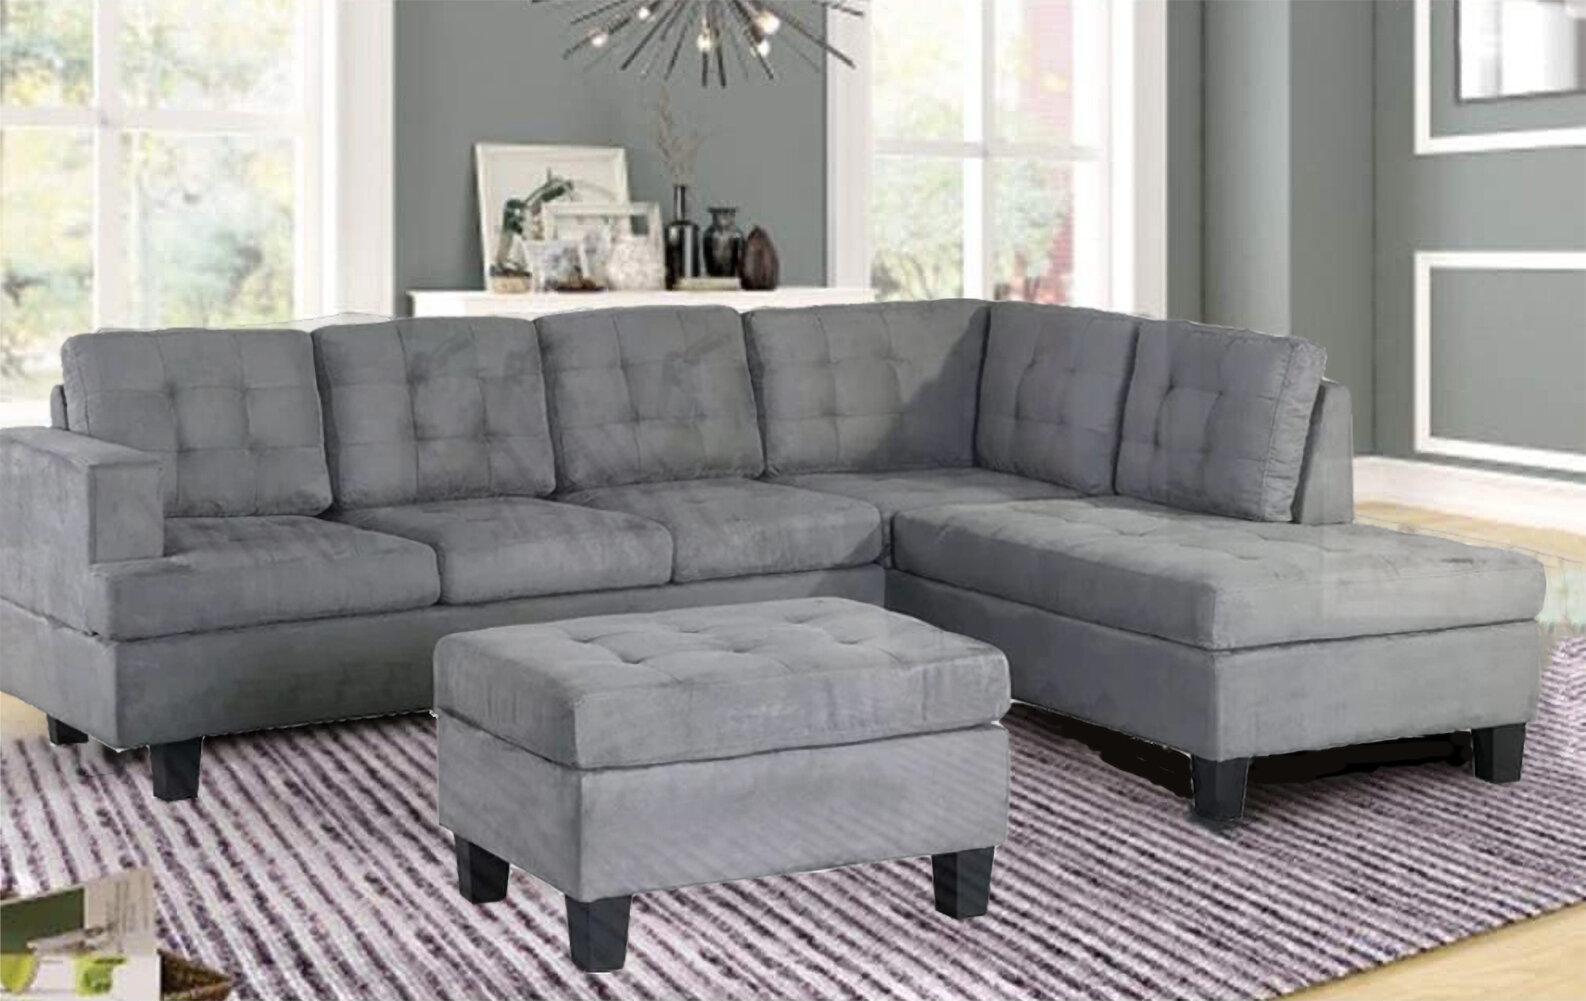 Latitude Run 3 Pieces L Shape Upholstery Sectional Sofa Set Living Room Furniture Set With Chaise And Ottoman Grey Wayfairca